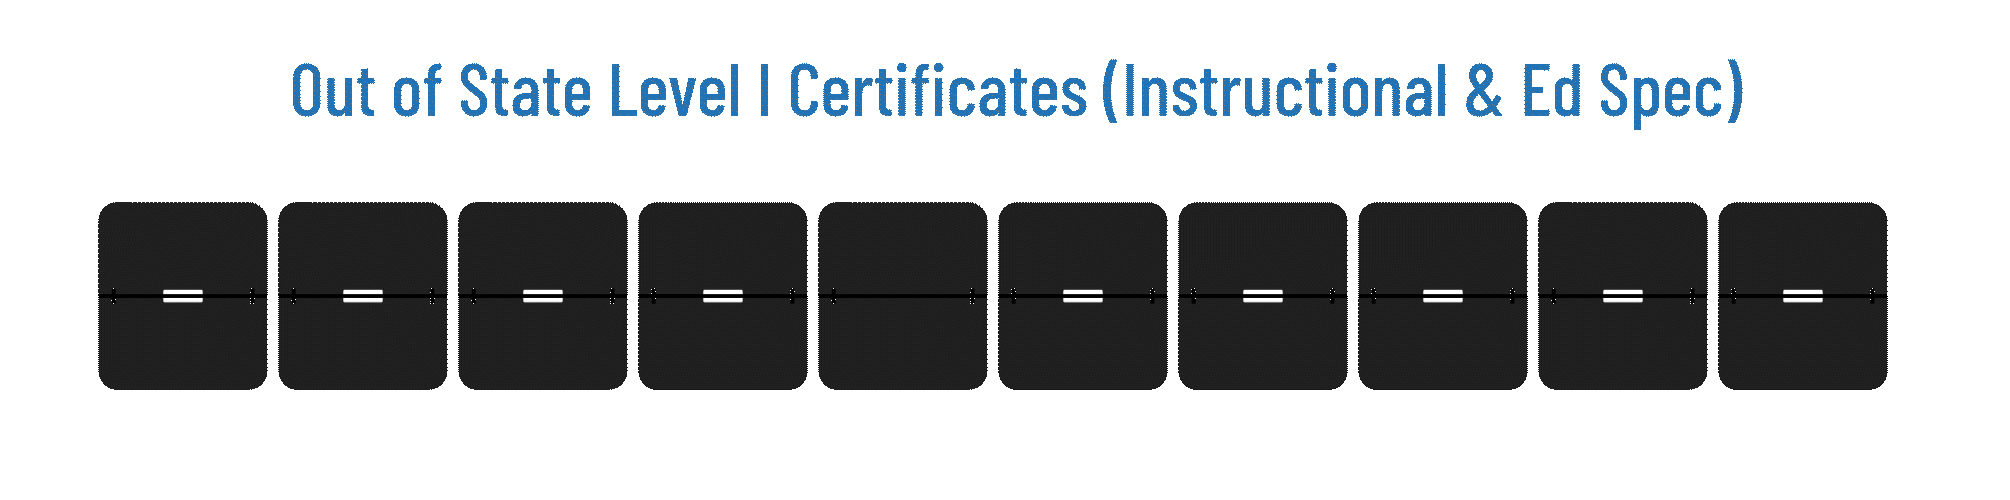 Out of State Level I Certificates (Instructional & Ed Spec) - less than 6 Weeks